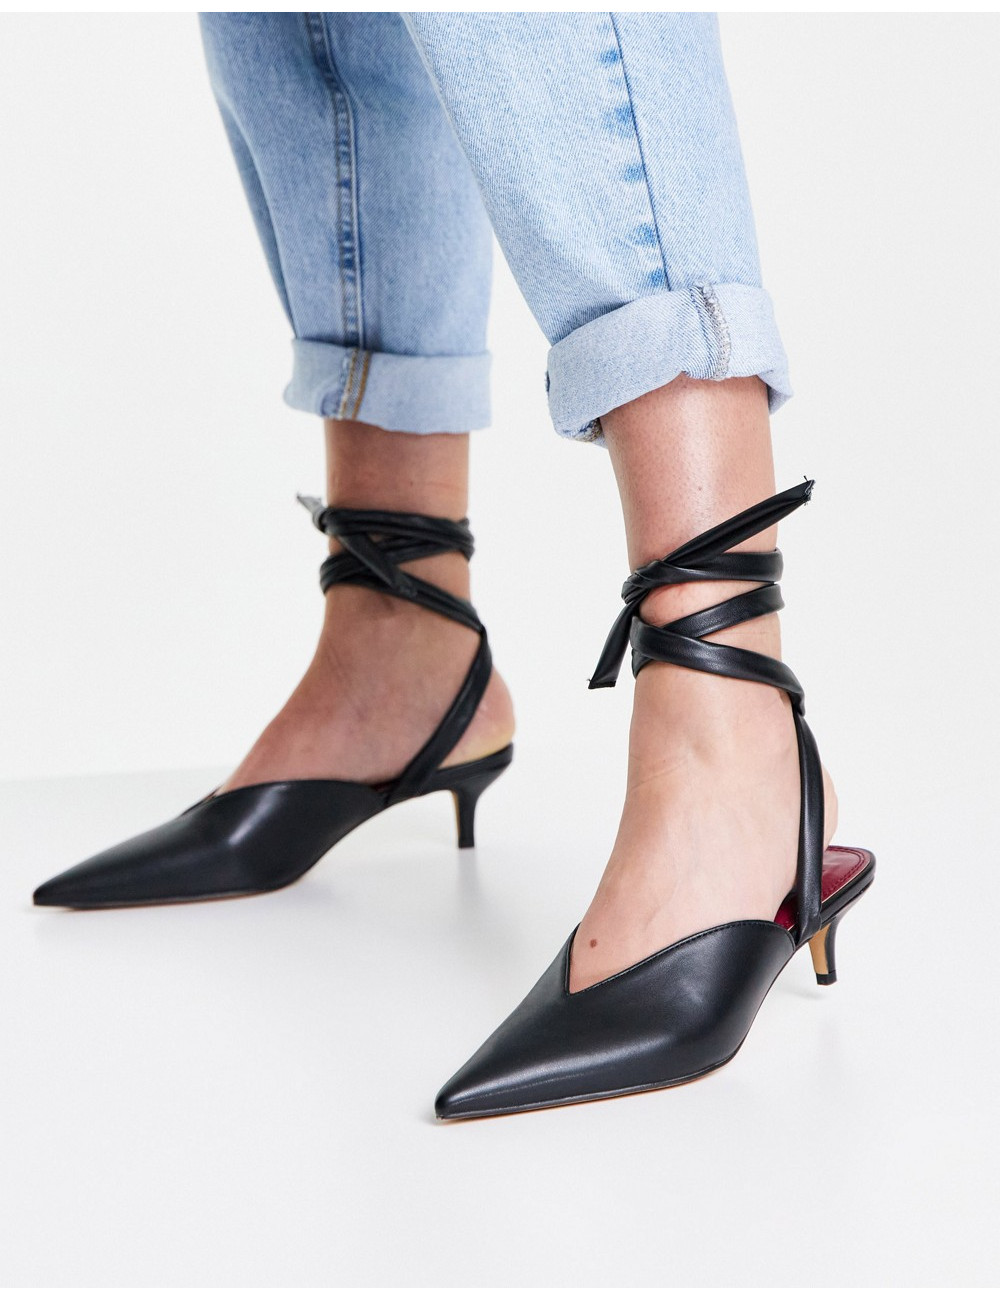 Topshop Fiona Ankle Tie...